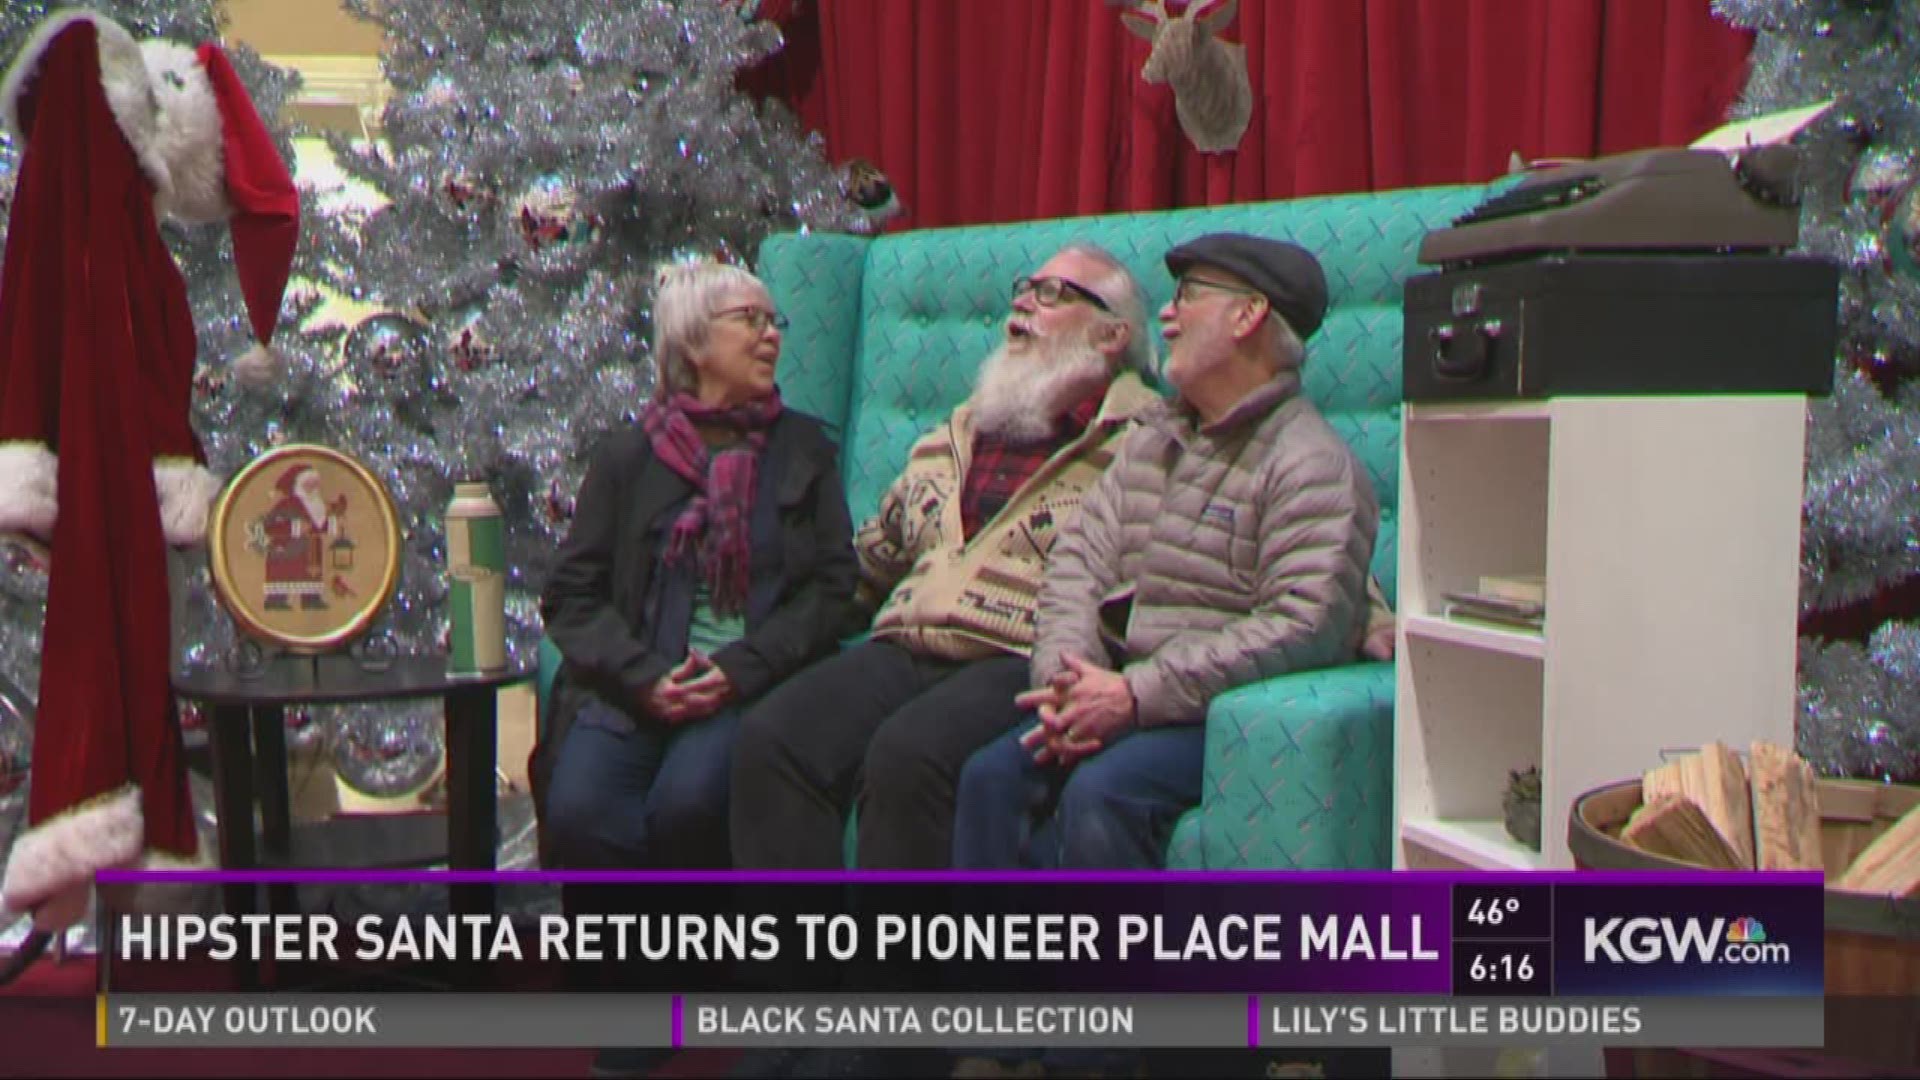 Hipster Santa returns to Pioneer Place mall